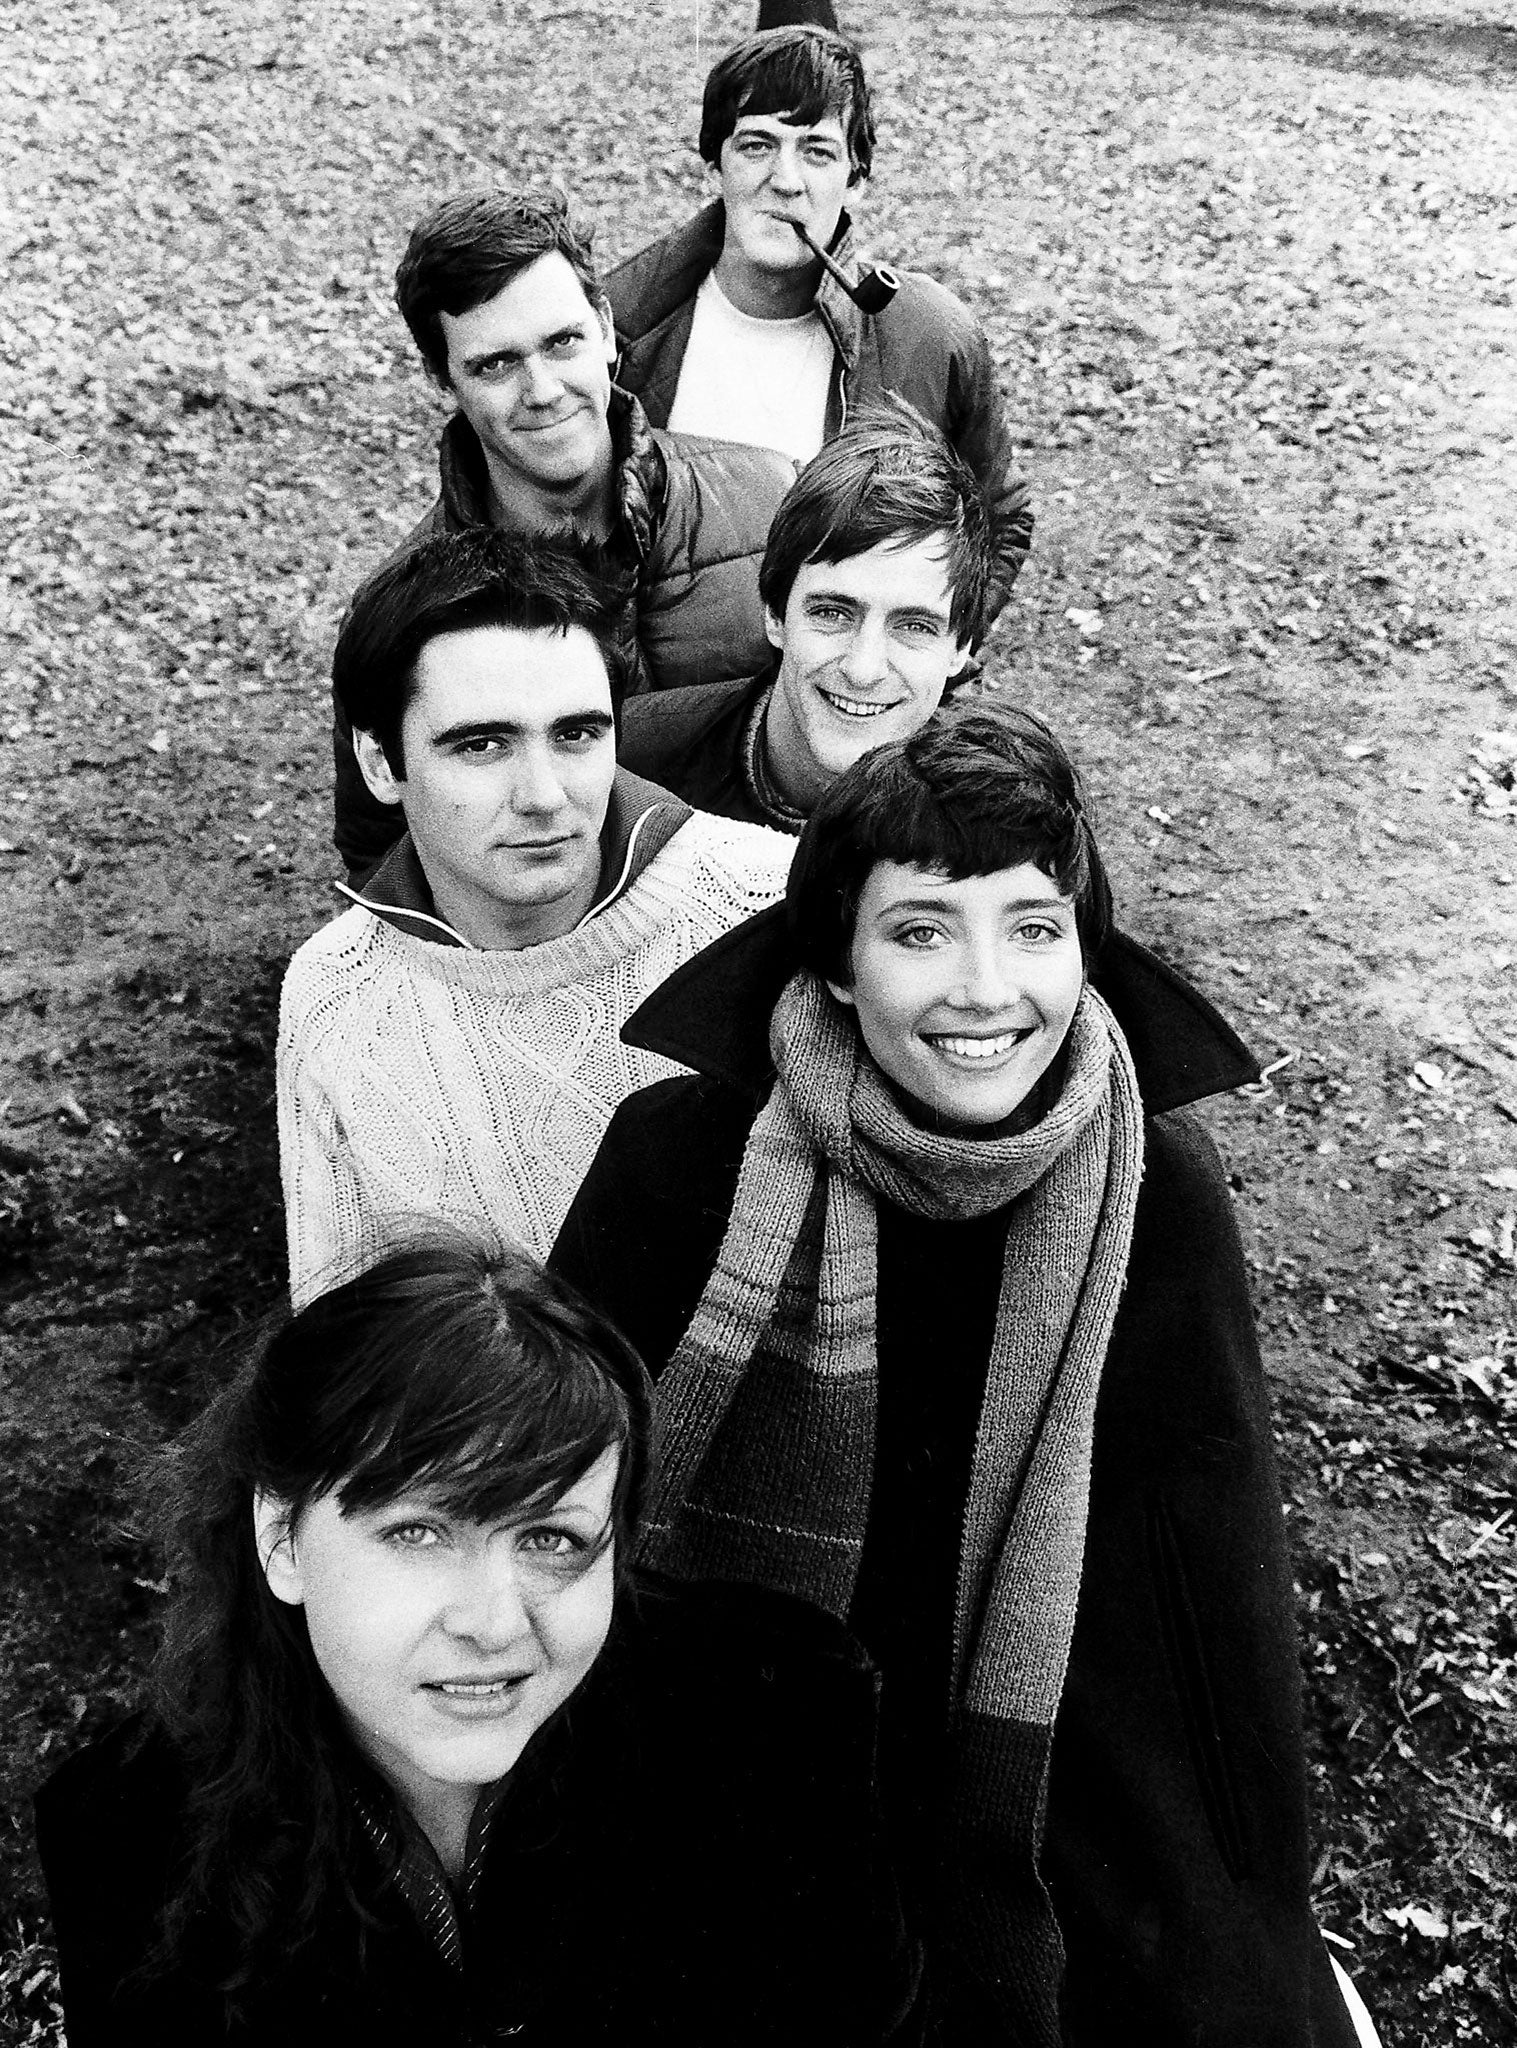 Over-talented: The Cambridge Footlights Revue featured Stephen Fry, Hugh Laurie, Emma Thompson, Tony Slattery and Paul Shearer